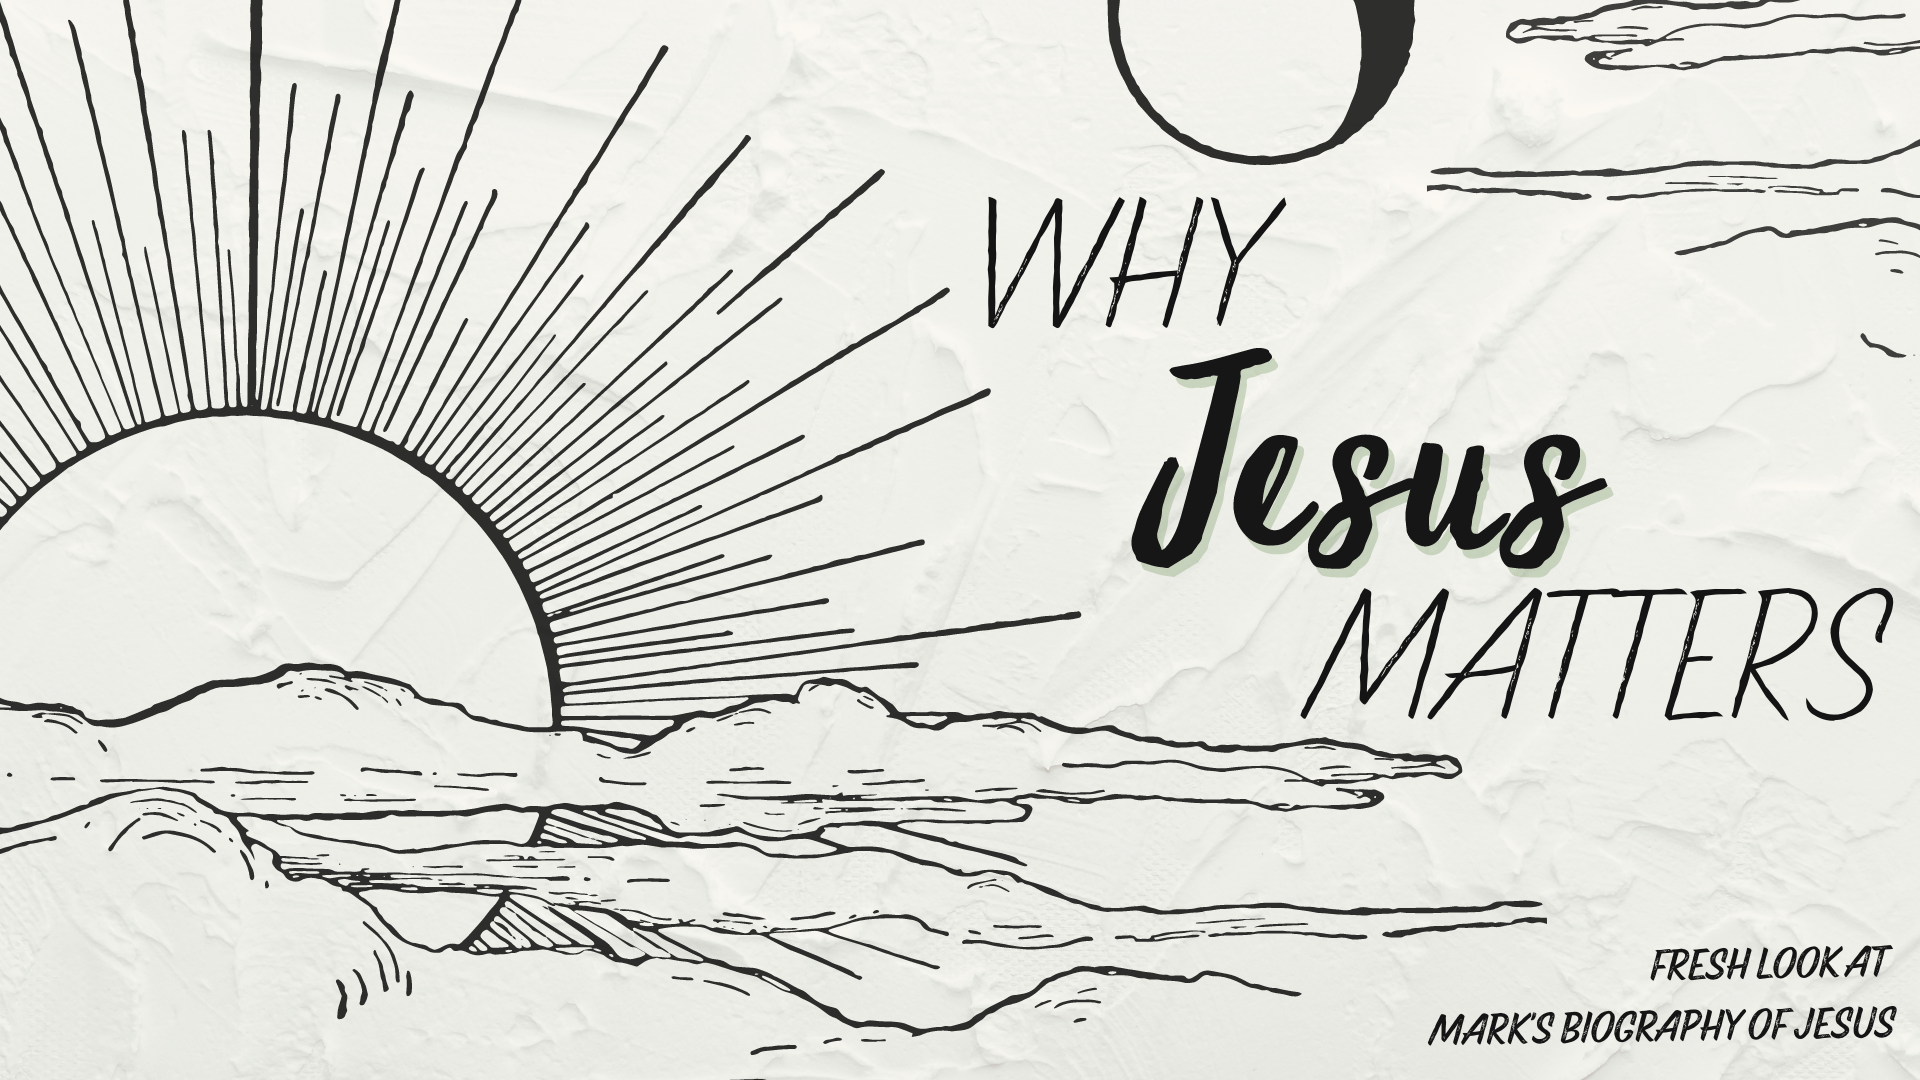 Why Jesus Matters